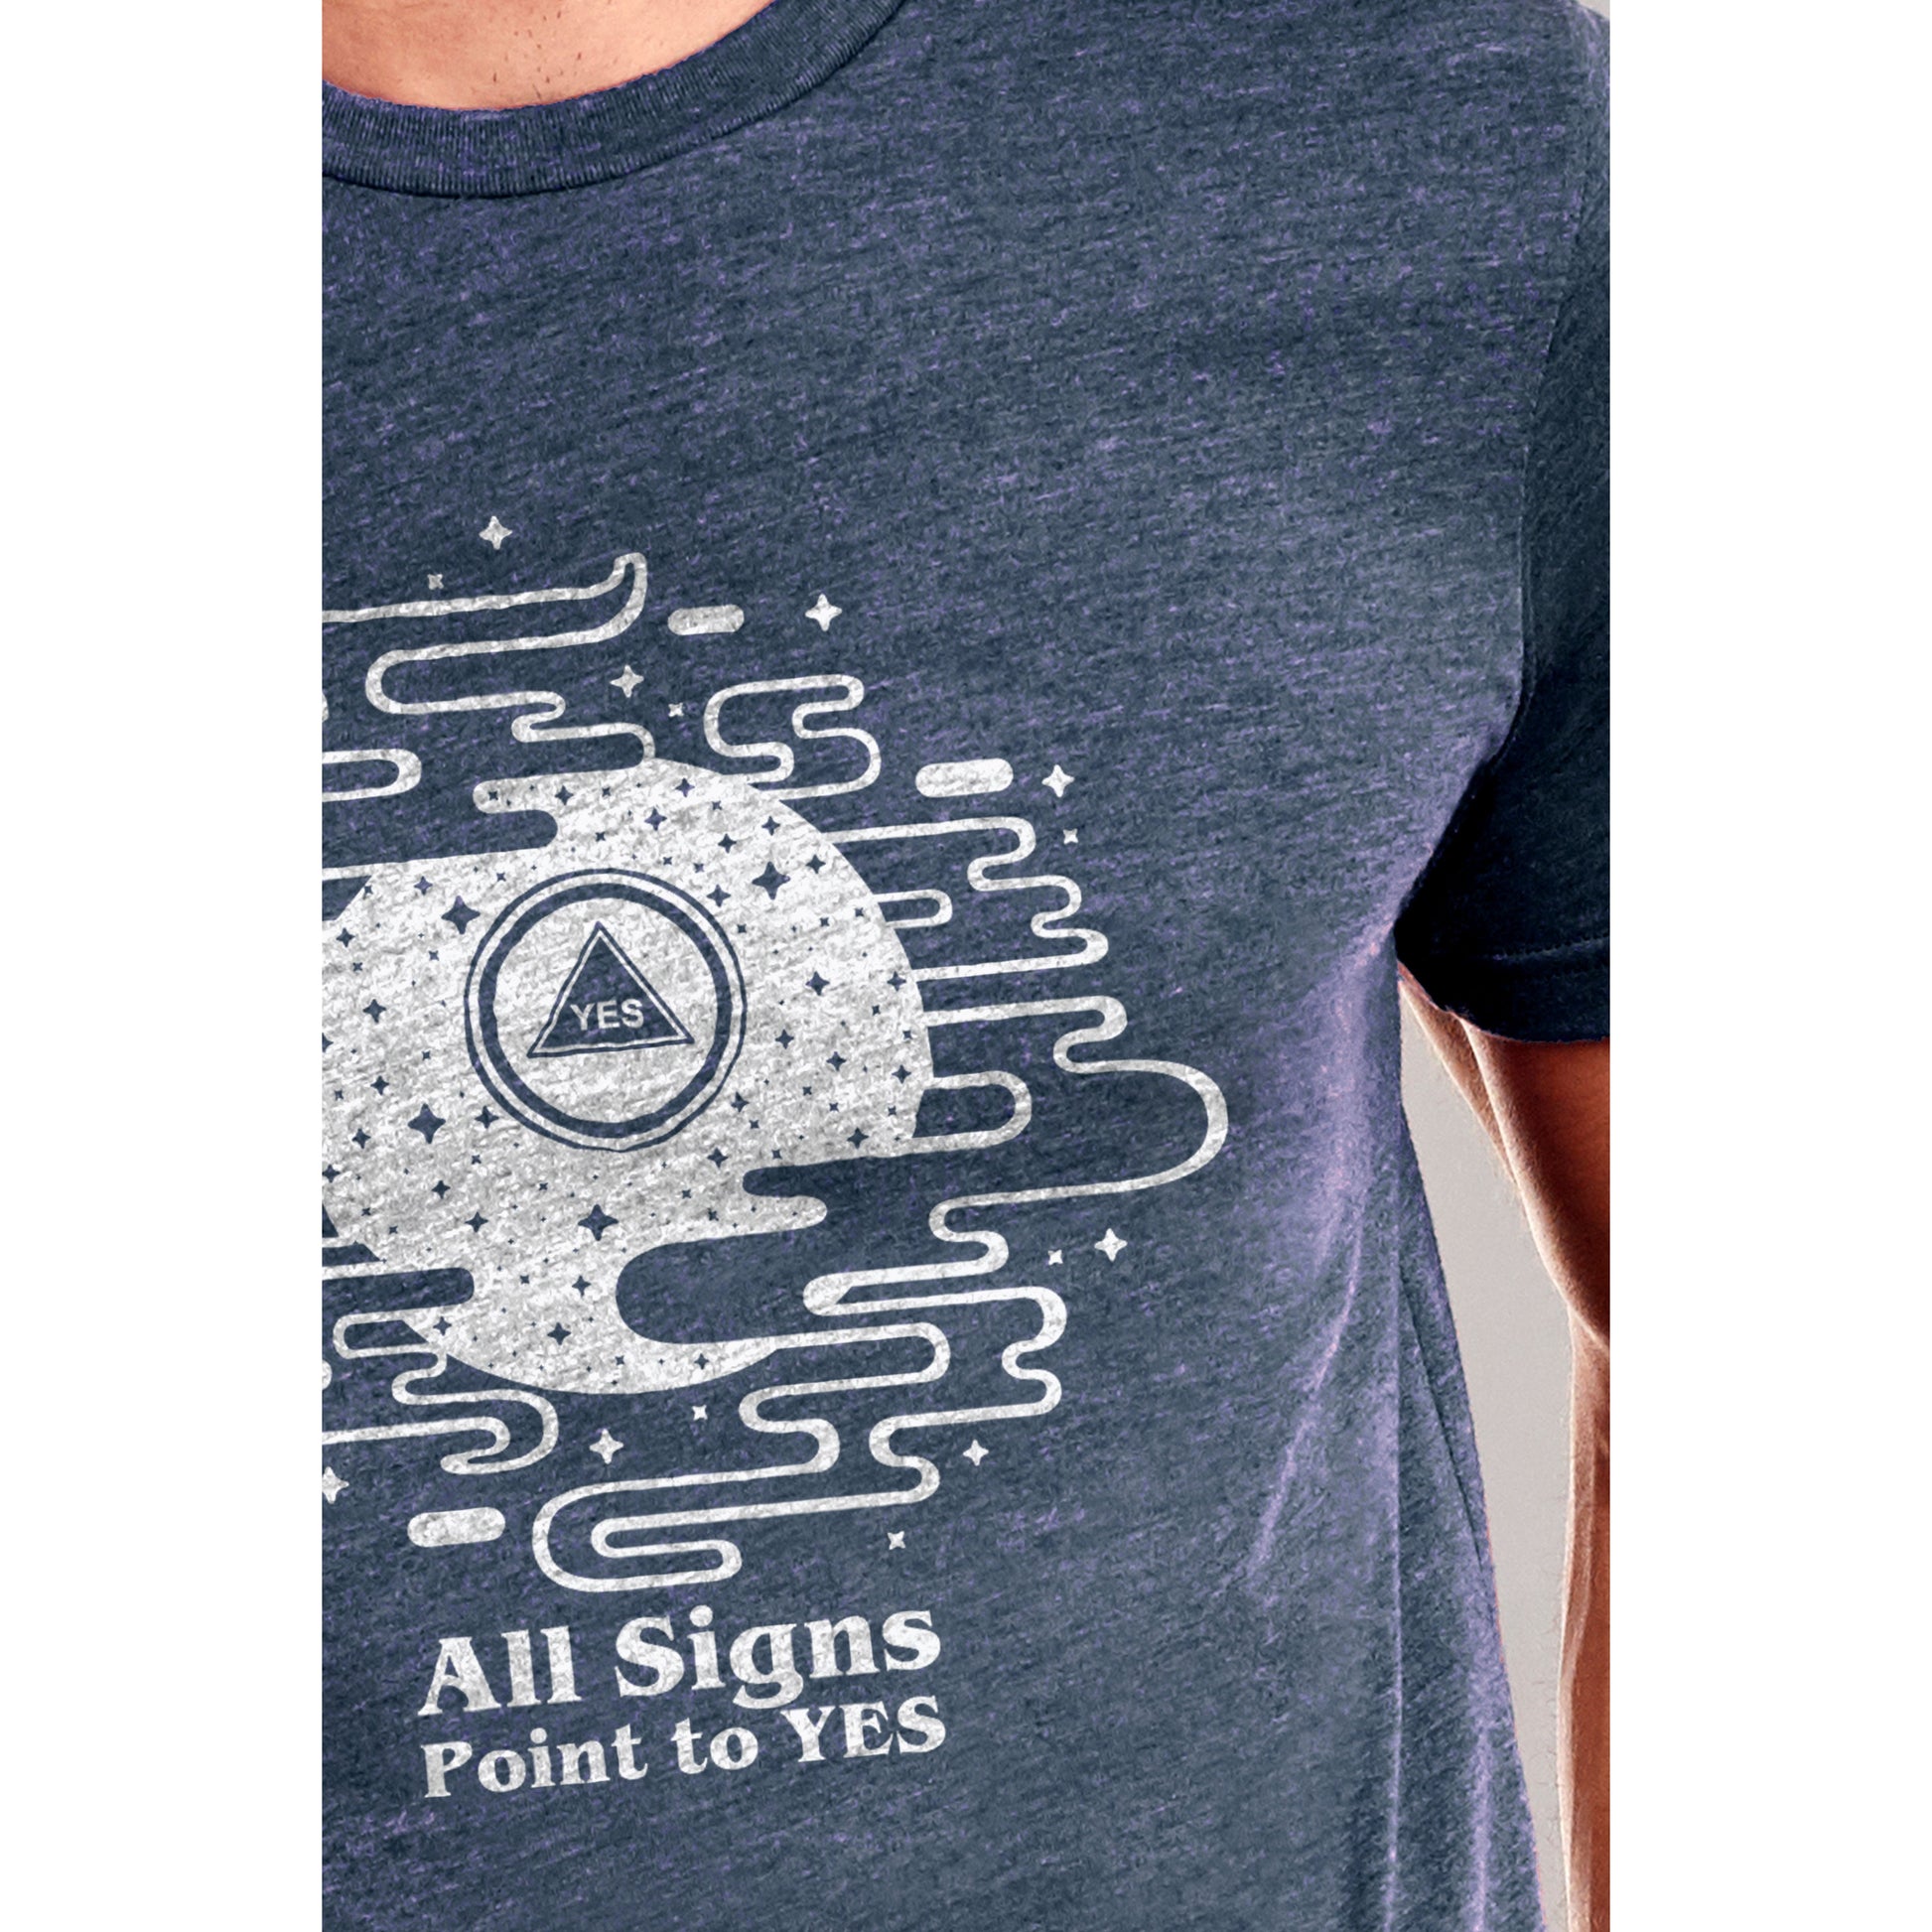 Signs Point To Yes Printed Graphic Men's Crew T-Shirt Vintage White Closeup Image